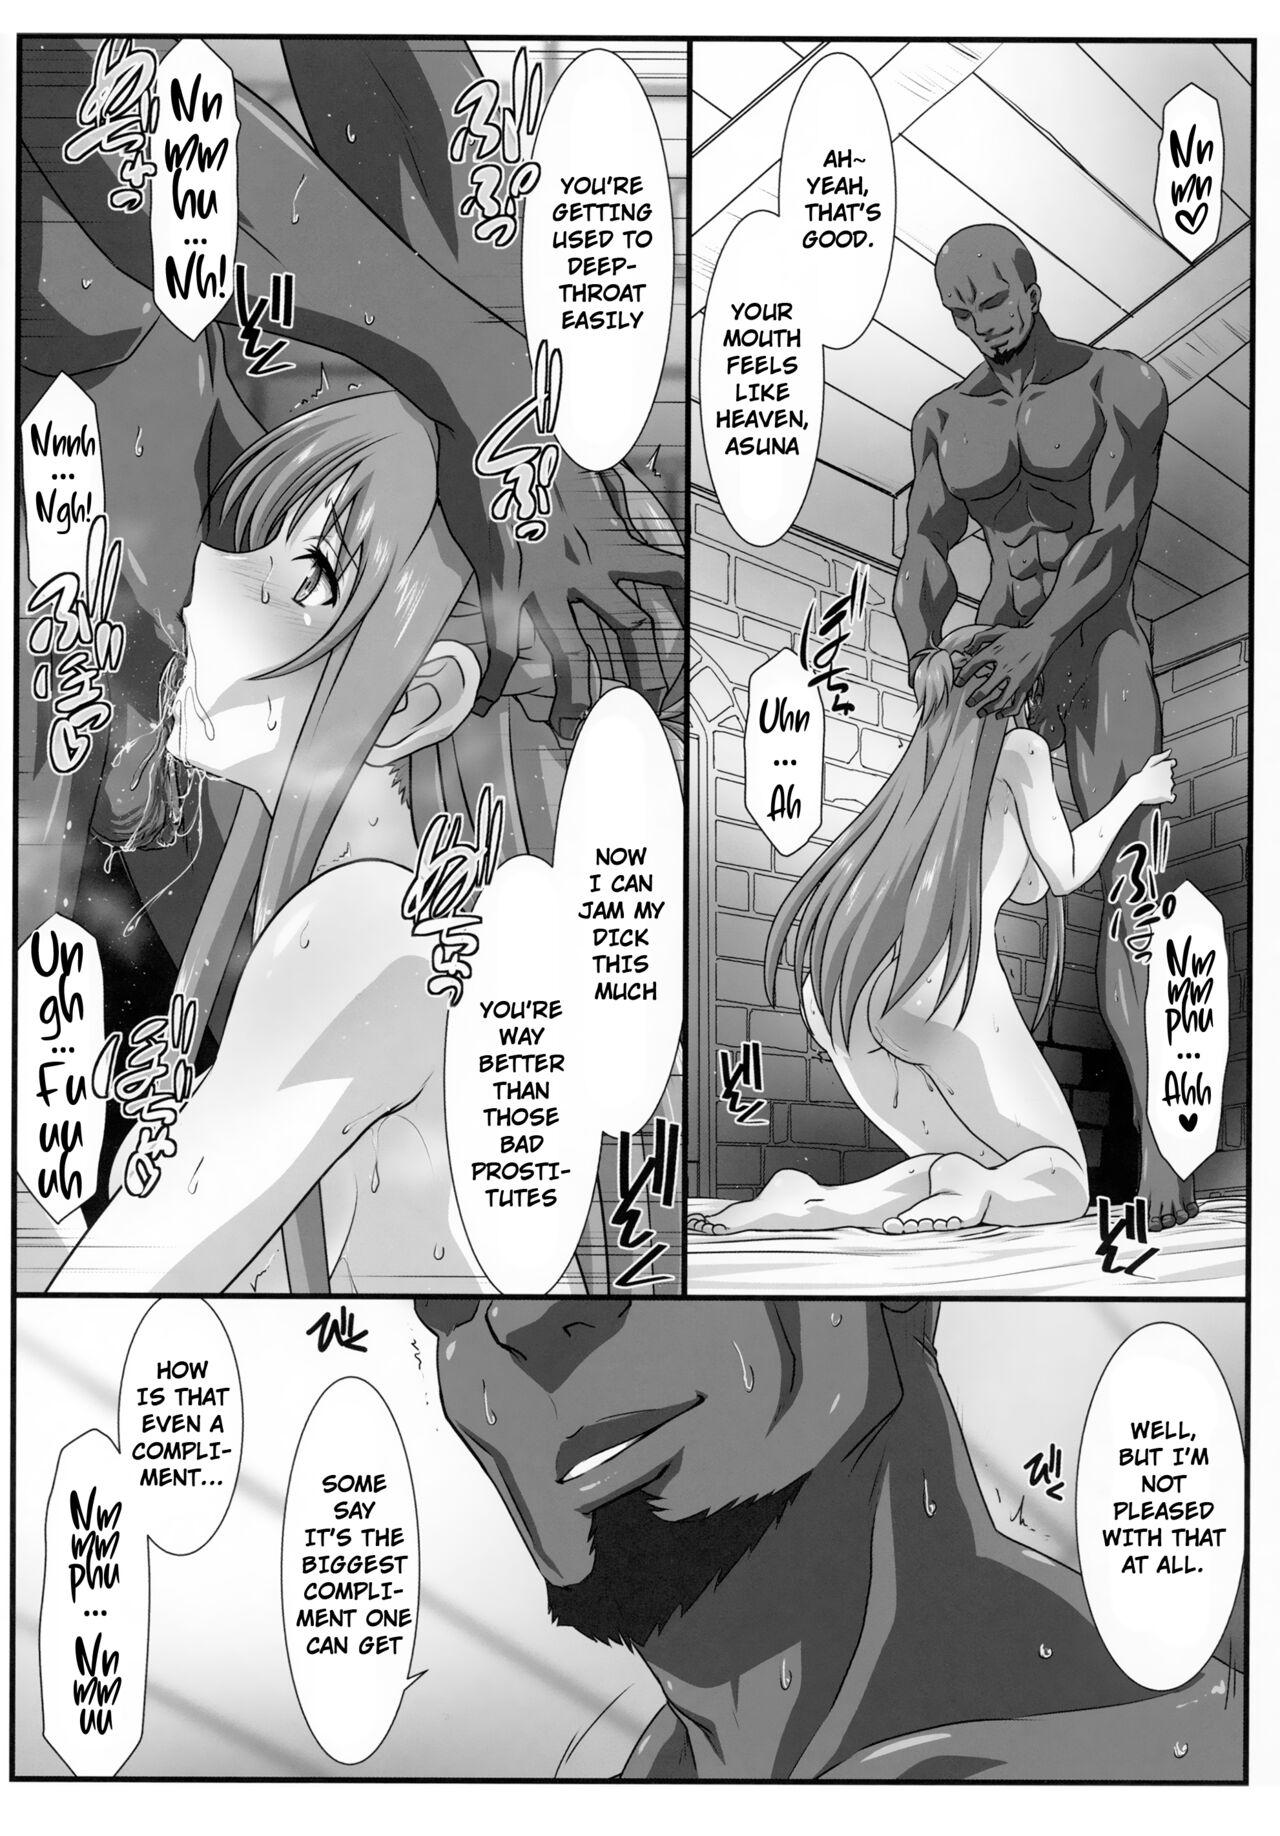 Pau Astral Bout Ver. 46 - Sword art online Pick Up - Page 9